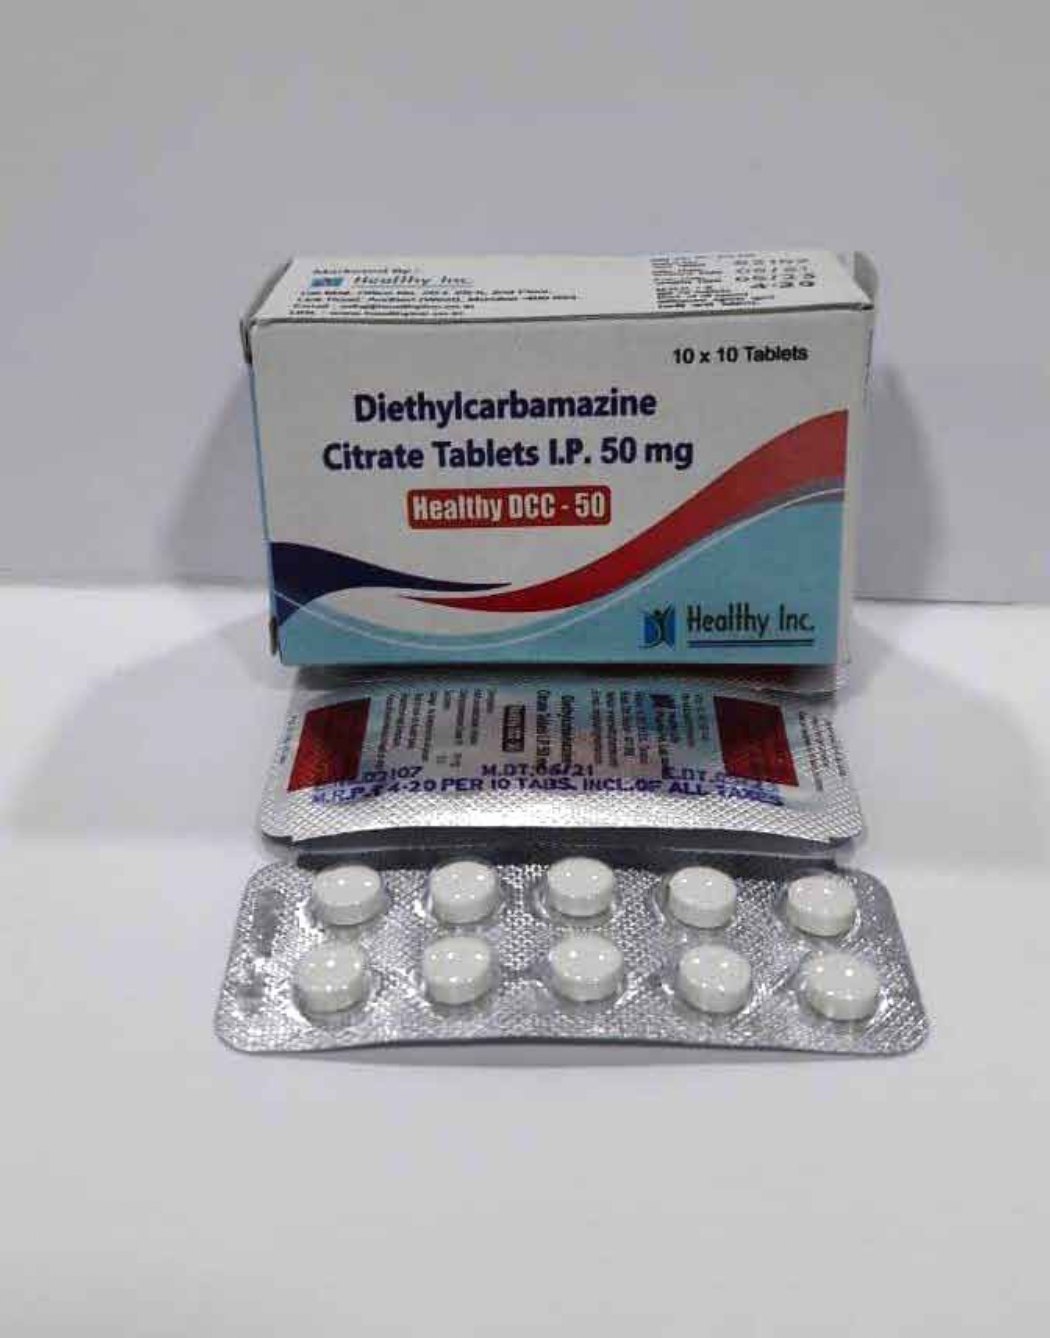 Diethylcarbamazine Citrate